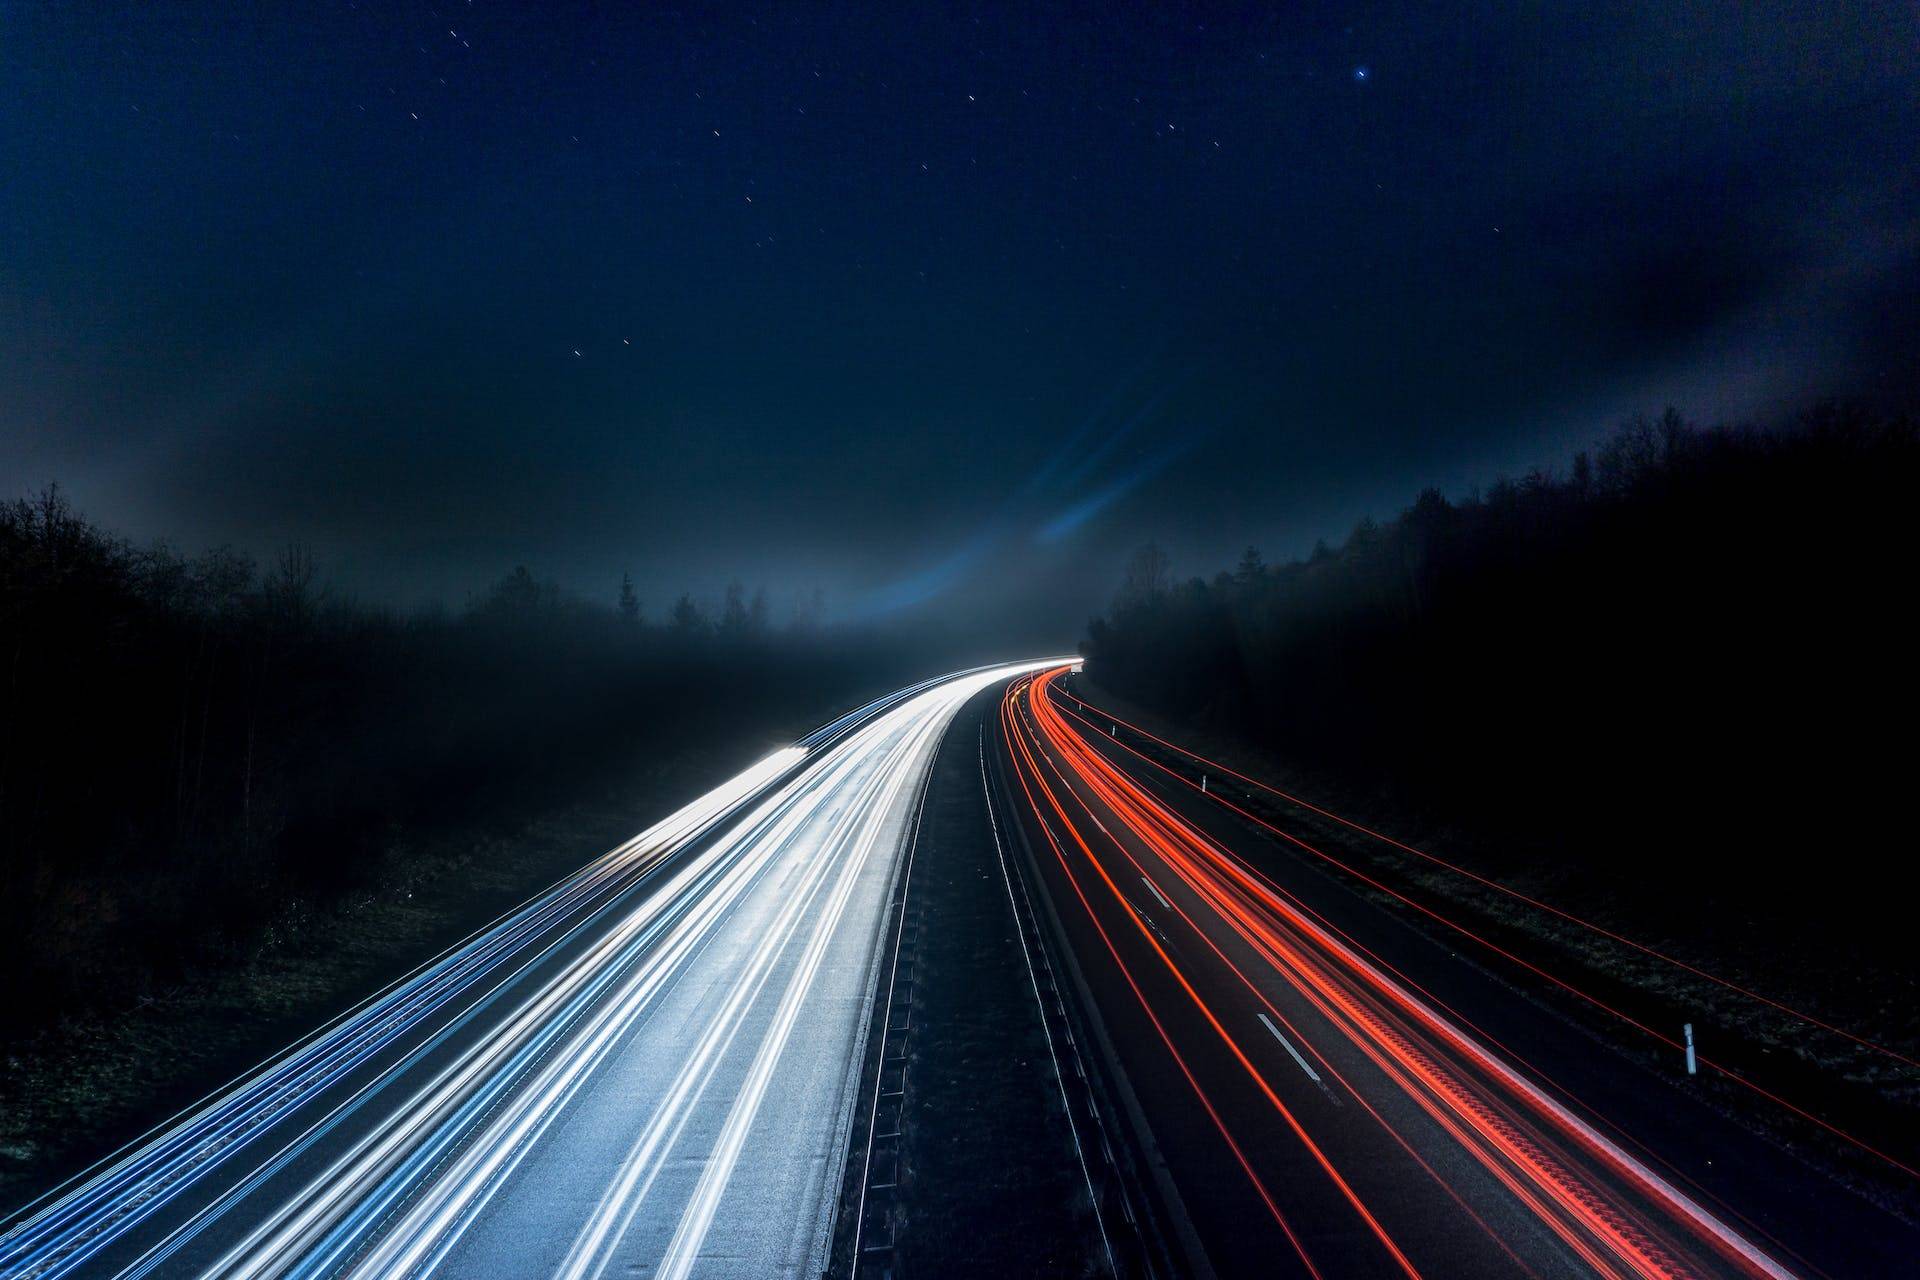 Light Trails of Cars at Night, Representing how Technical Writers work hard to keep the complex modern world we live in moving forward through Standard Operating Procedures